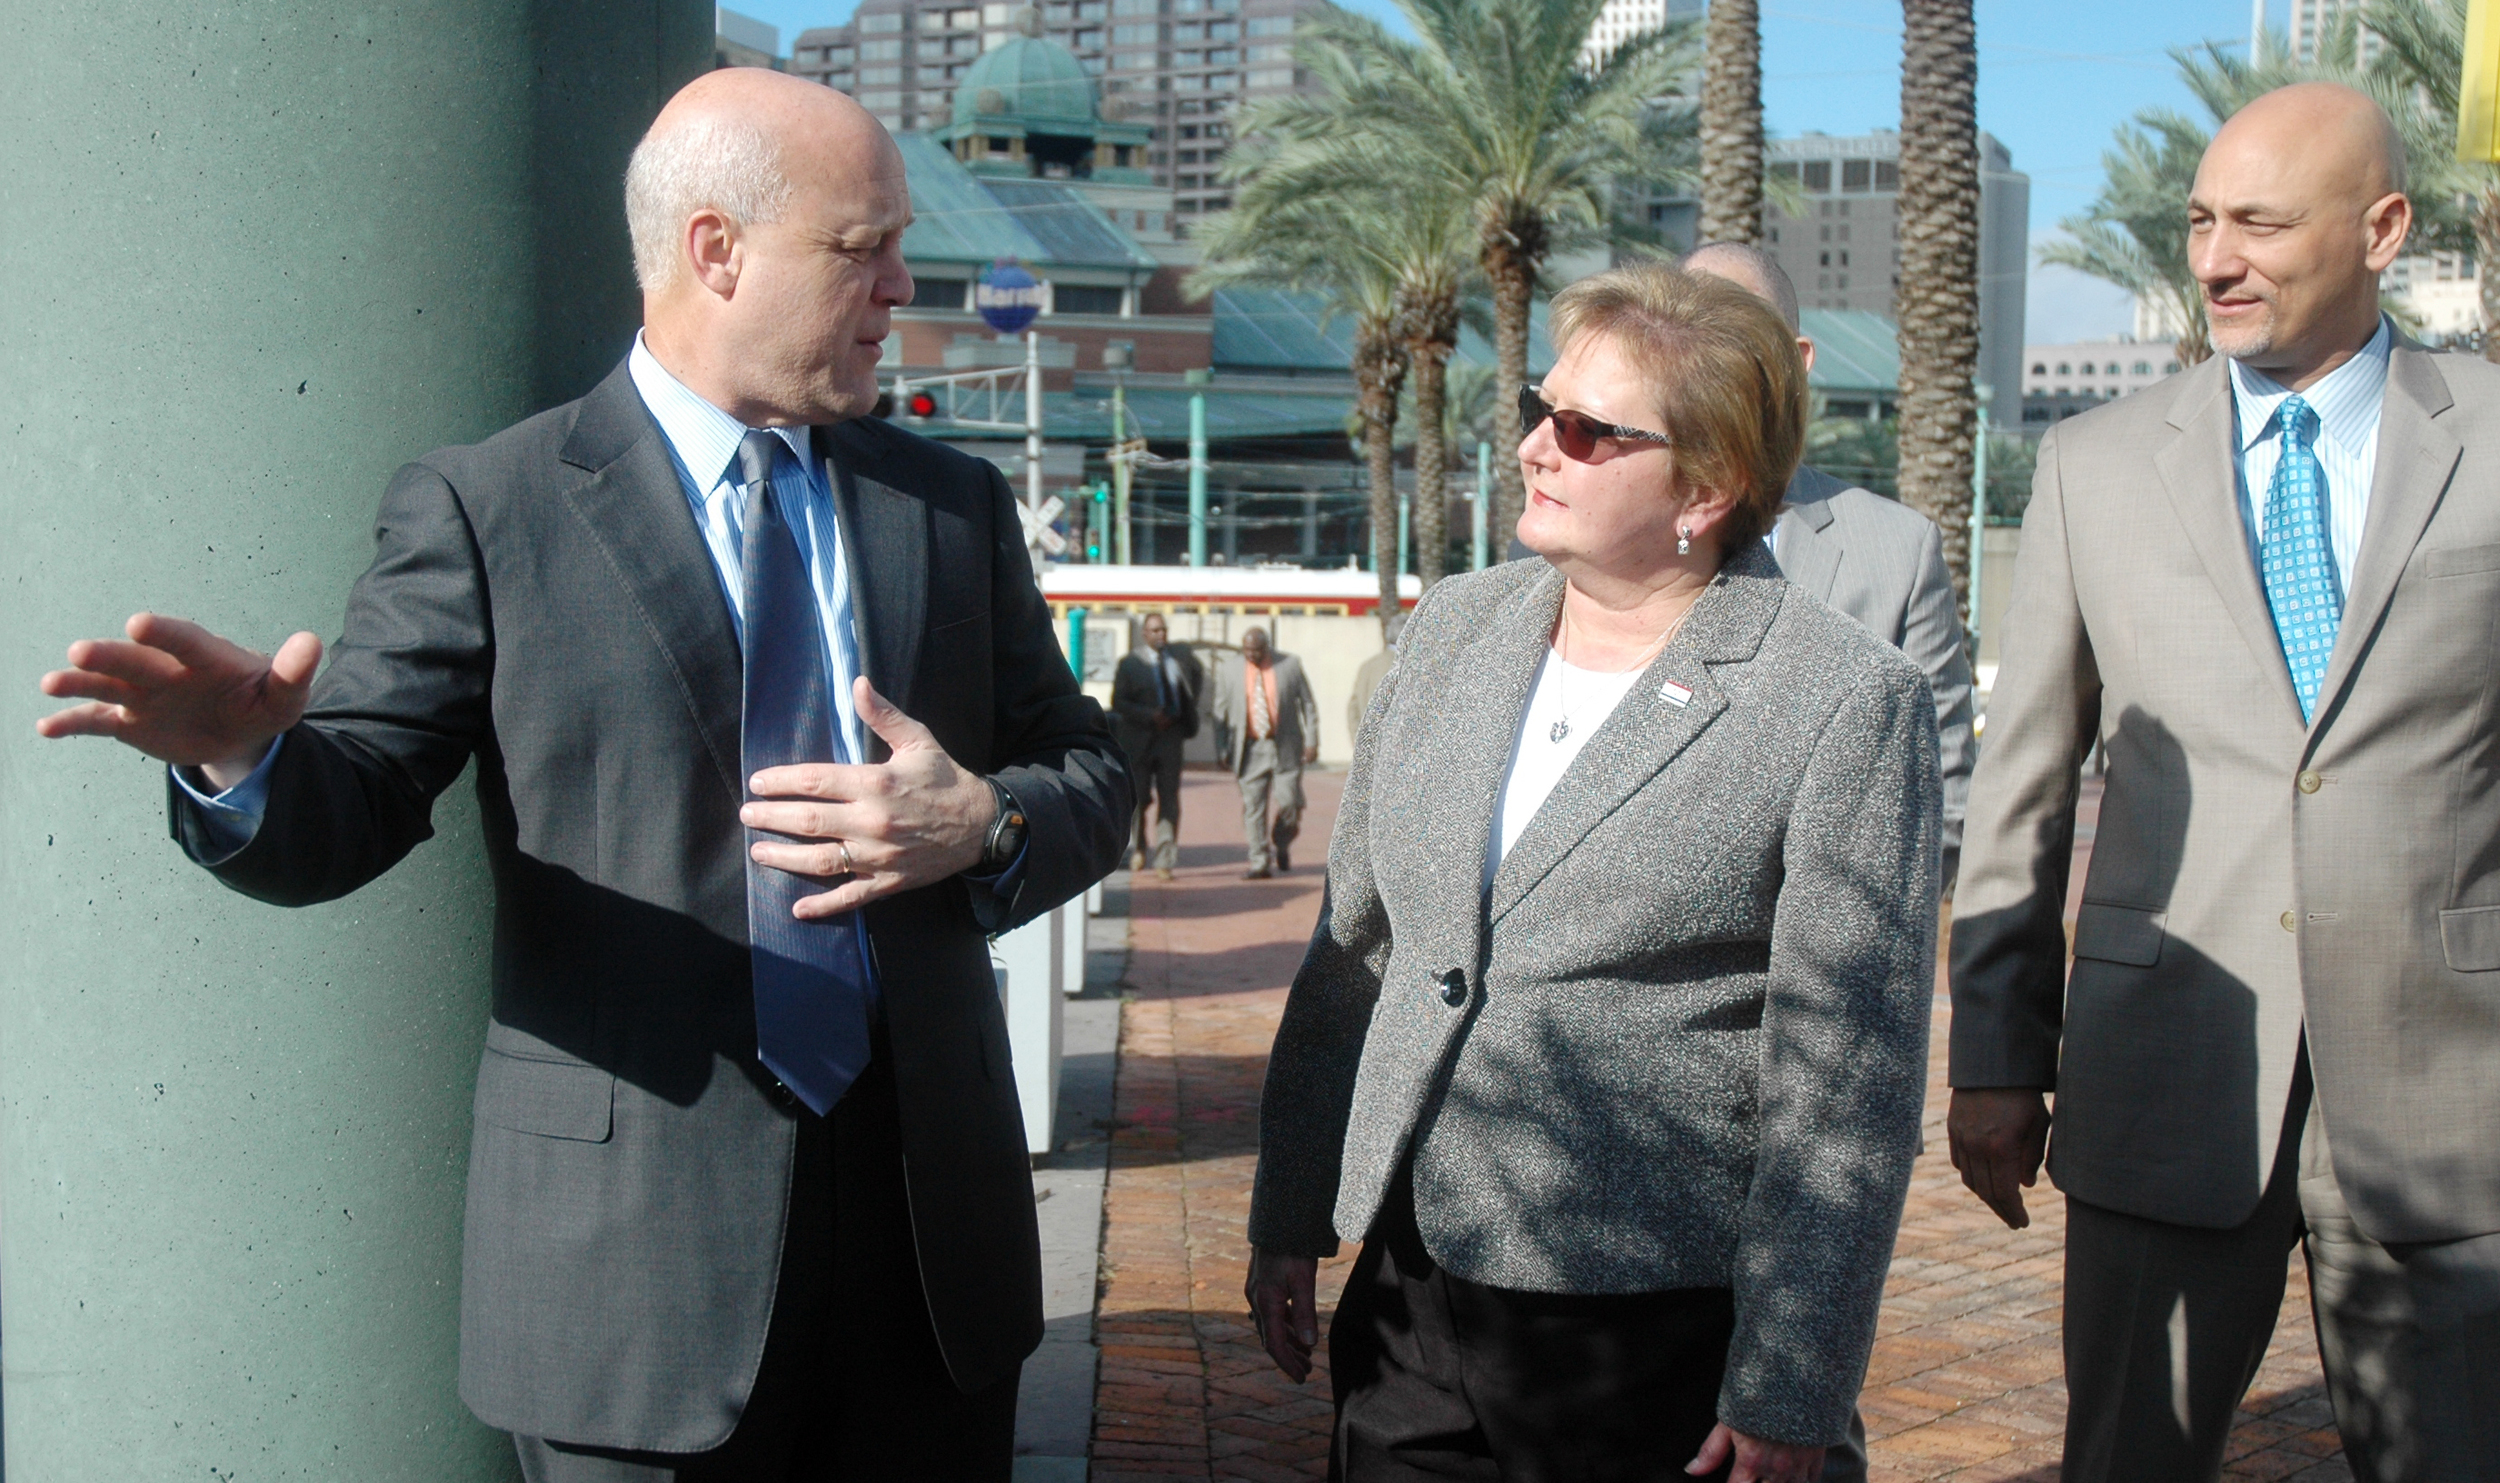  Mayor Mitch Landrieu talks about the plans for the new Canal Street Ferry Terminal as he walks with District "A" Councilmember Susan Guidry and Infinity Engineering Principal Raoul V. Chauvin, III.&nbsp; 